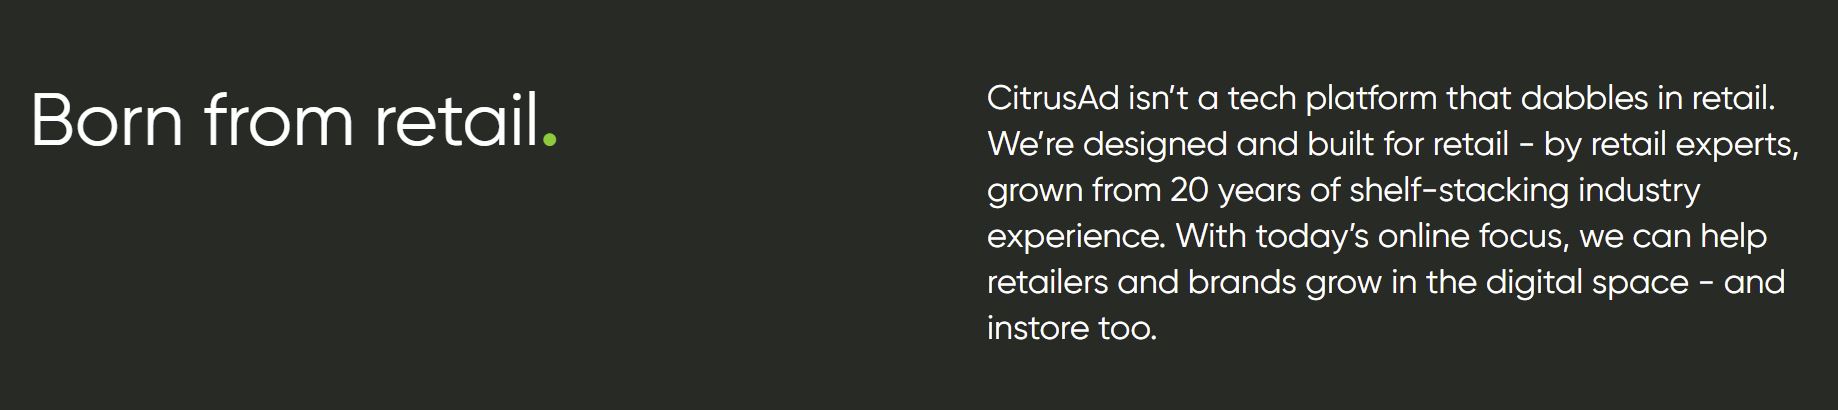 CitrusAd is born from retail